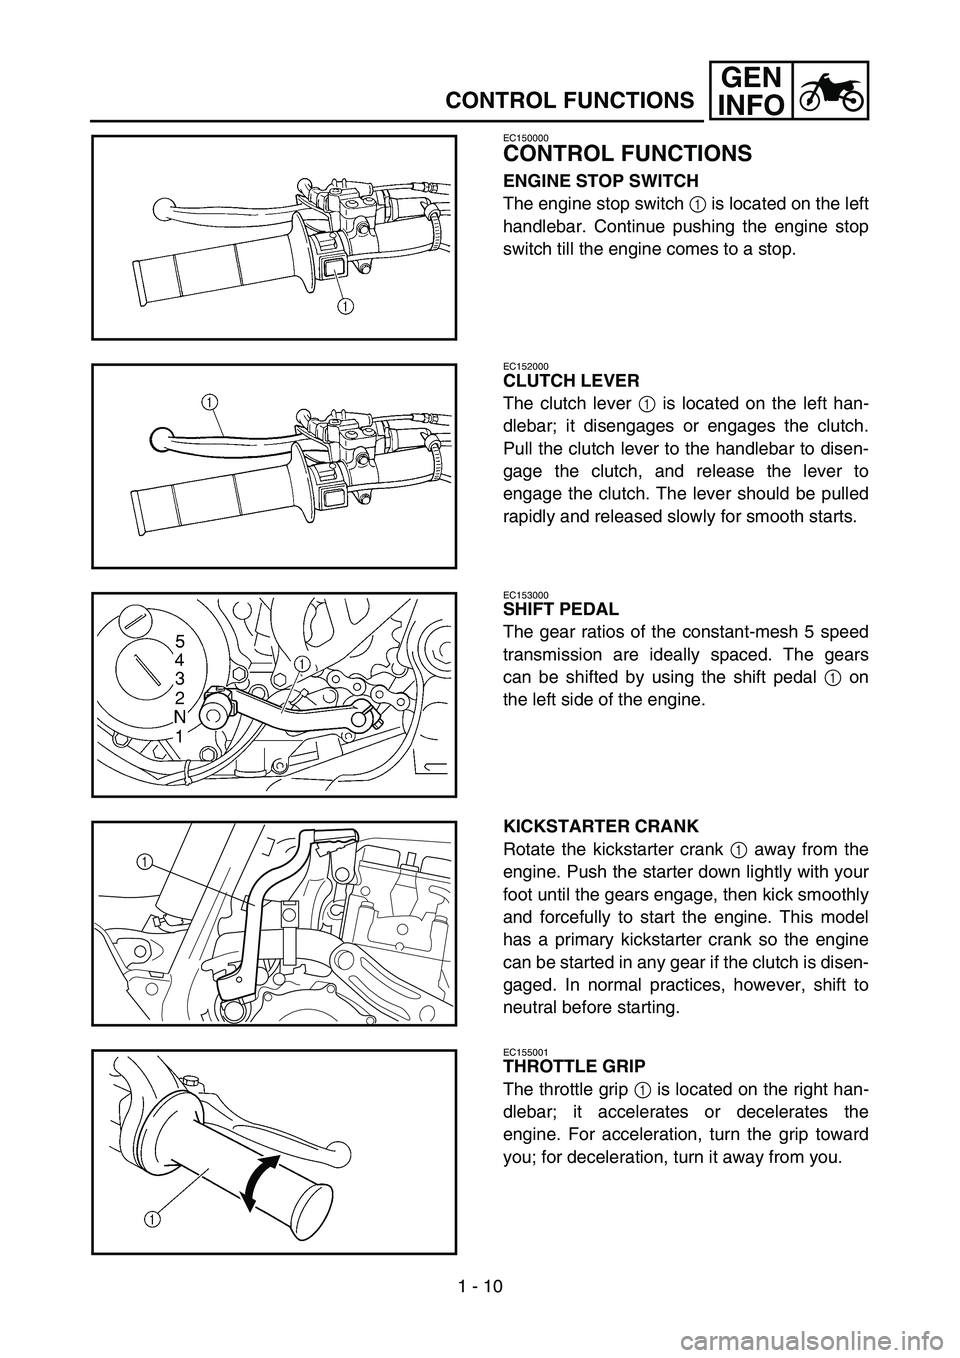 YAMAHA YZ250F 2007  Owners Manual 1 - 10
GEN
INFO
CONTROL FUNCTIONS
EC150000
CONTROL FUNCTIONS
ENGINE STOP SWITCH
The engine stop switch 1 is located on the left
handlebar. Continue pushing the engine stop
switch till the engine comes